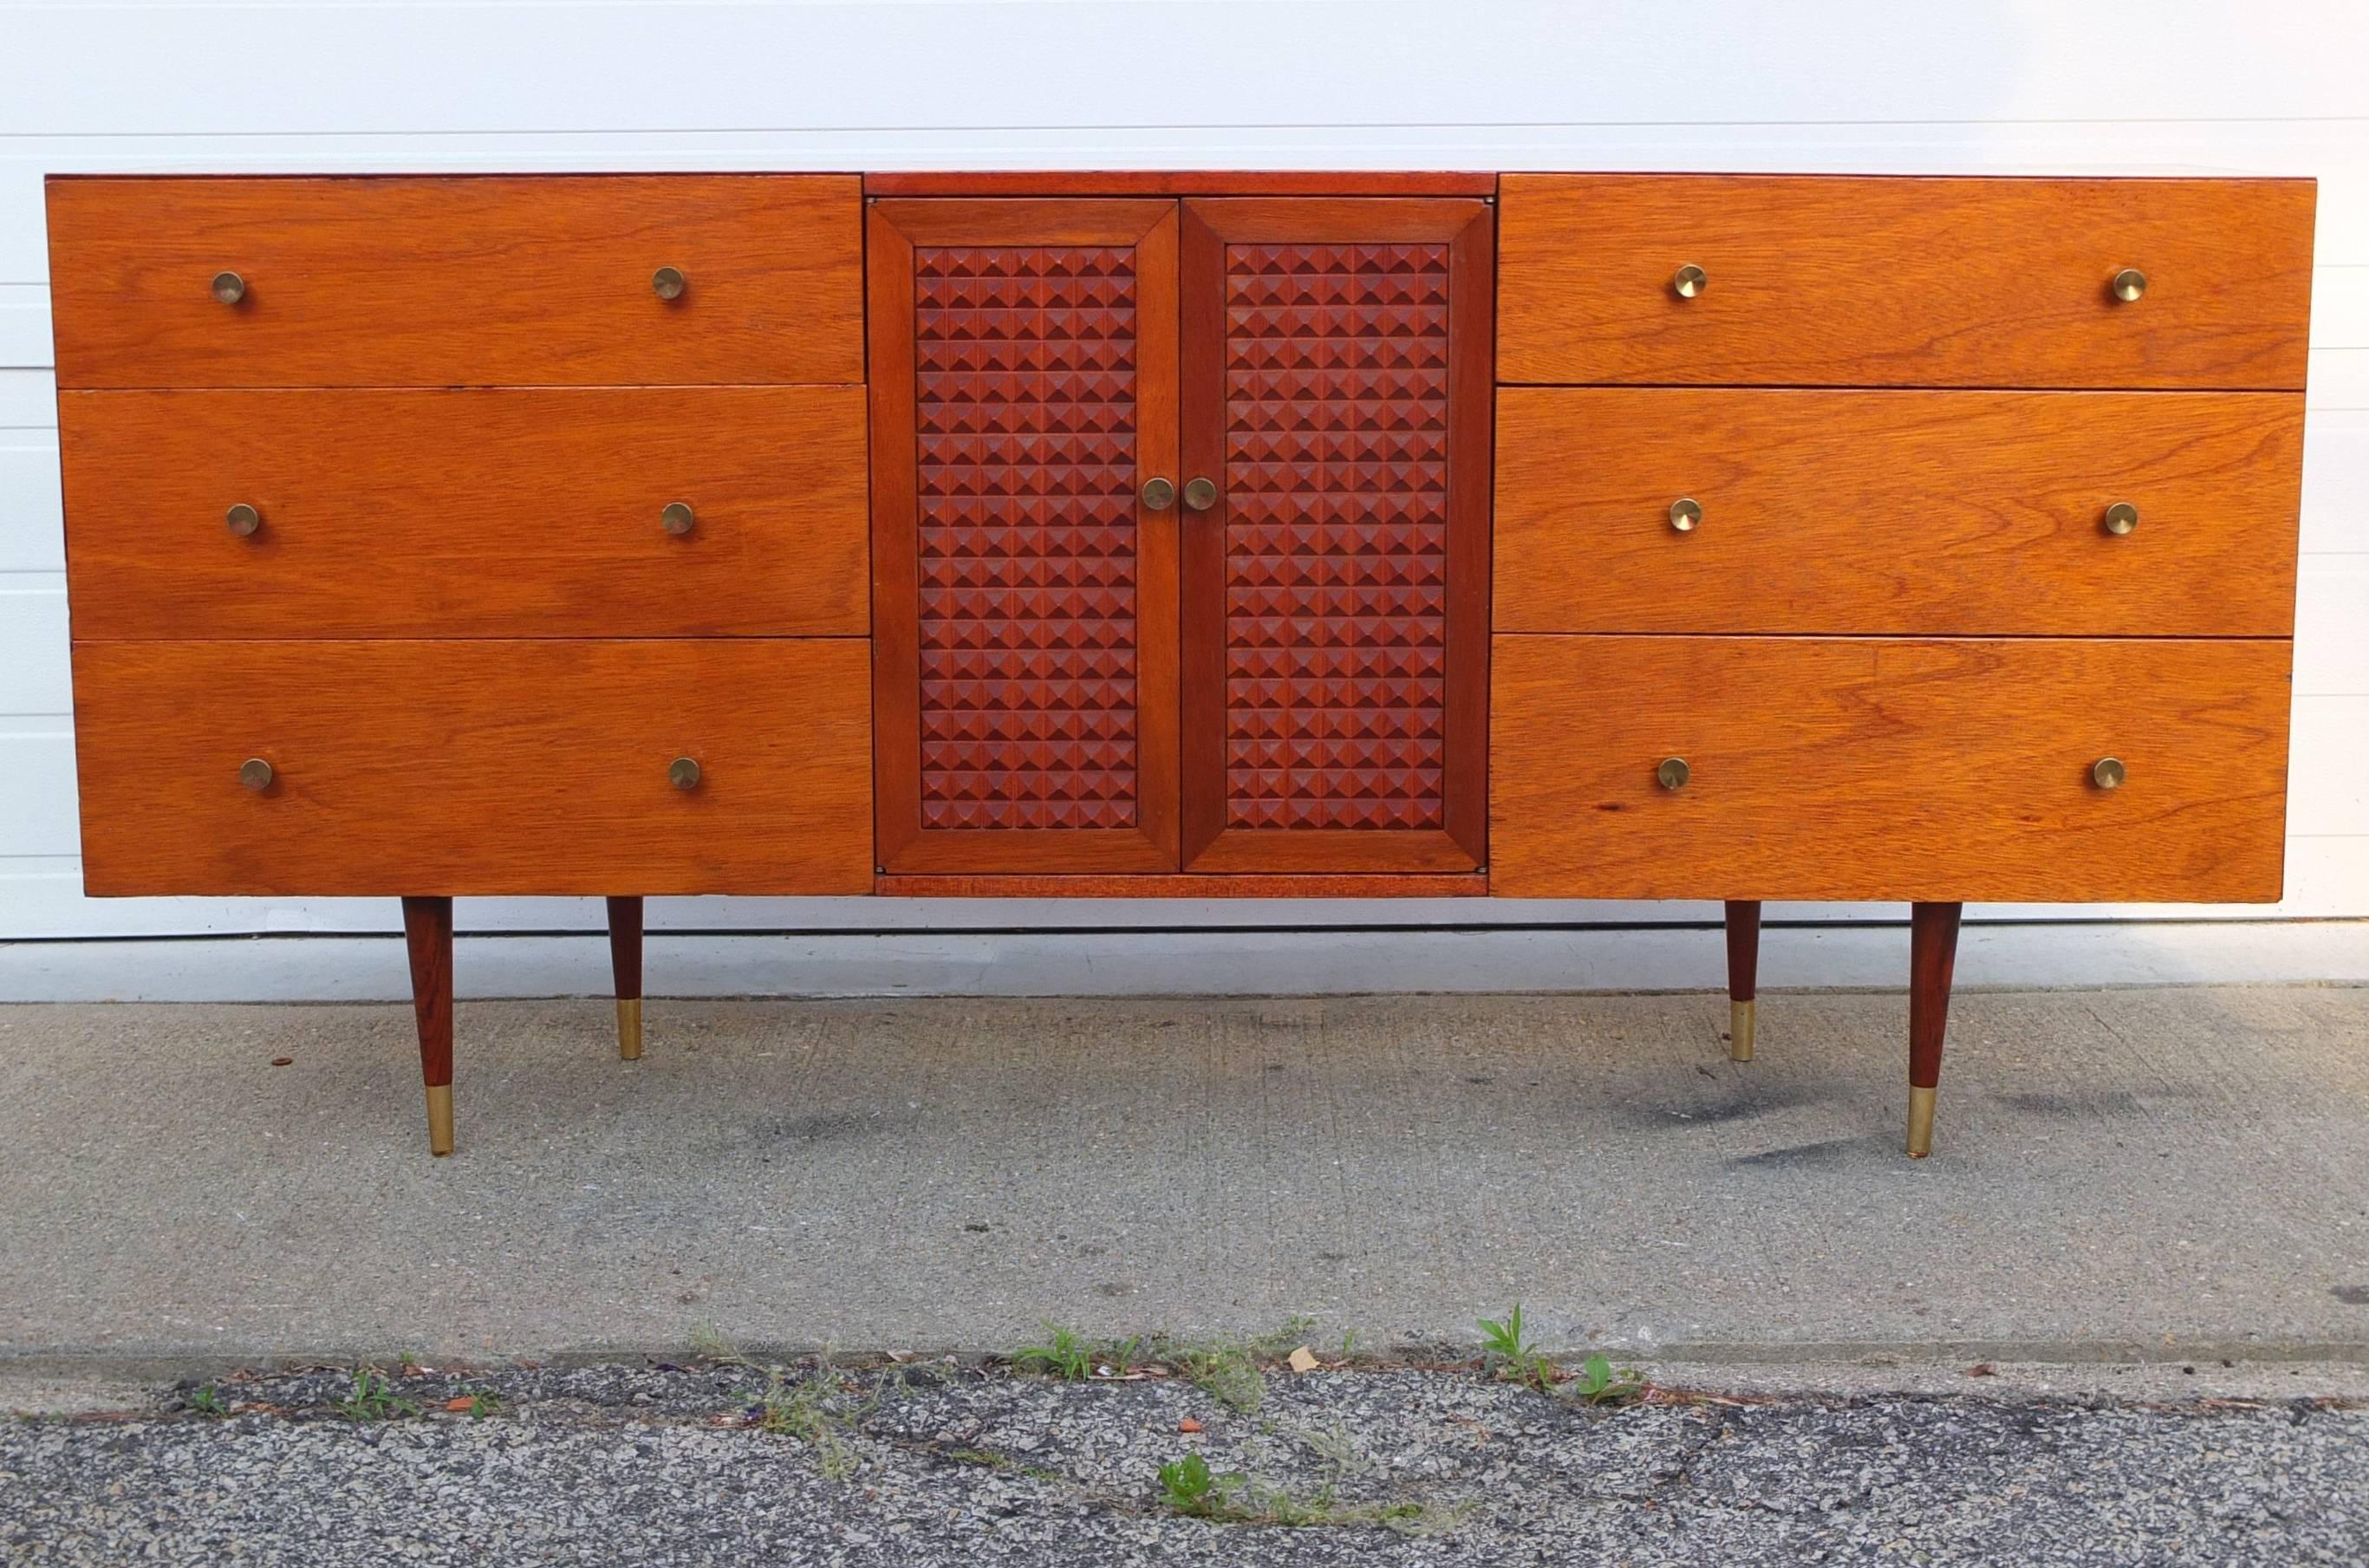 SATURDAY SALE no further discounts

Mid-Century Modern long low dresser with two stacks of three drawers and a center open cabinet with nubbed textured door panels.
The wood appears to be walnut that has been clear varnished or perhaps stained with